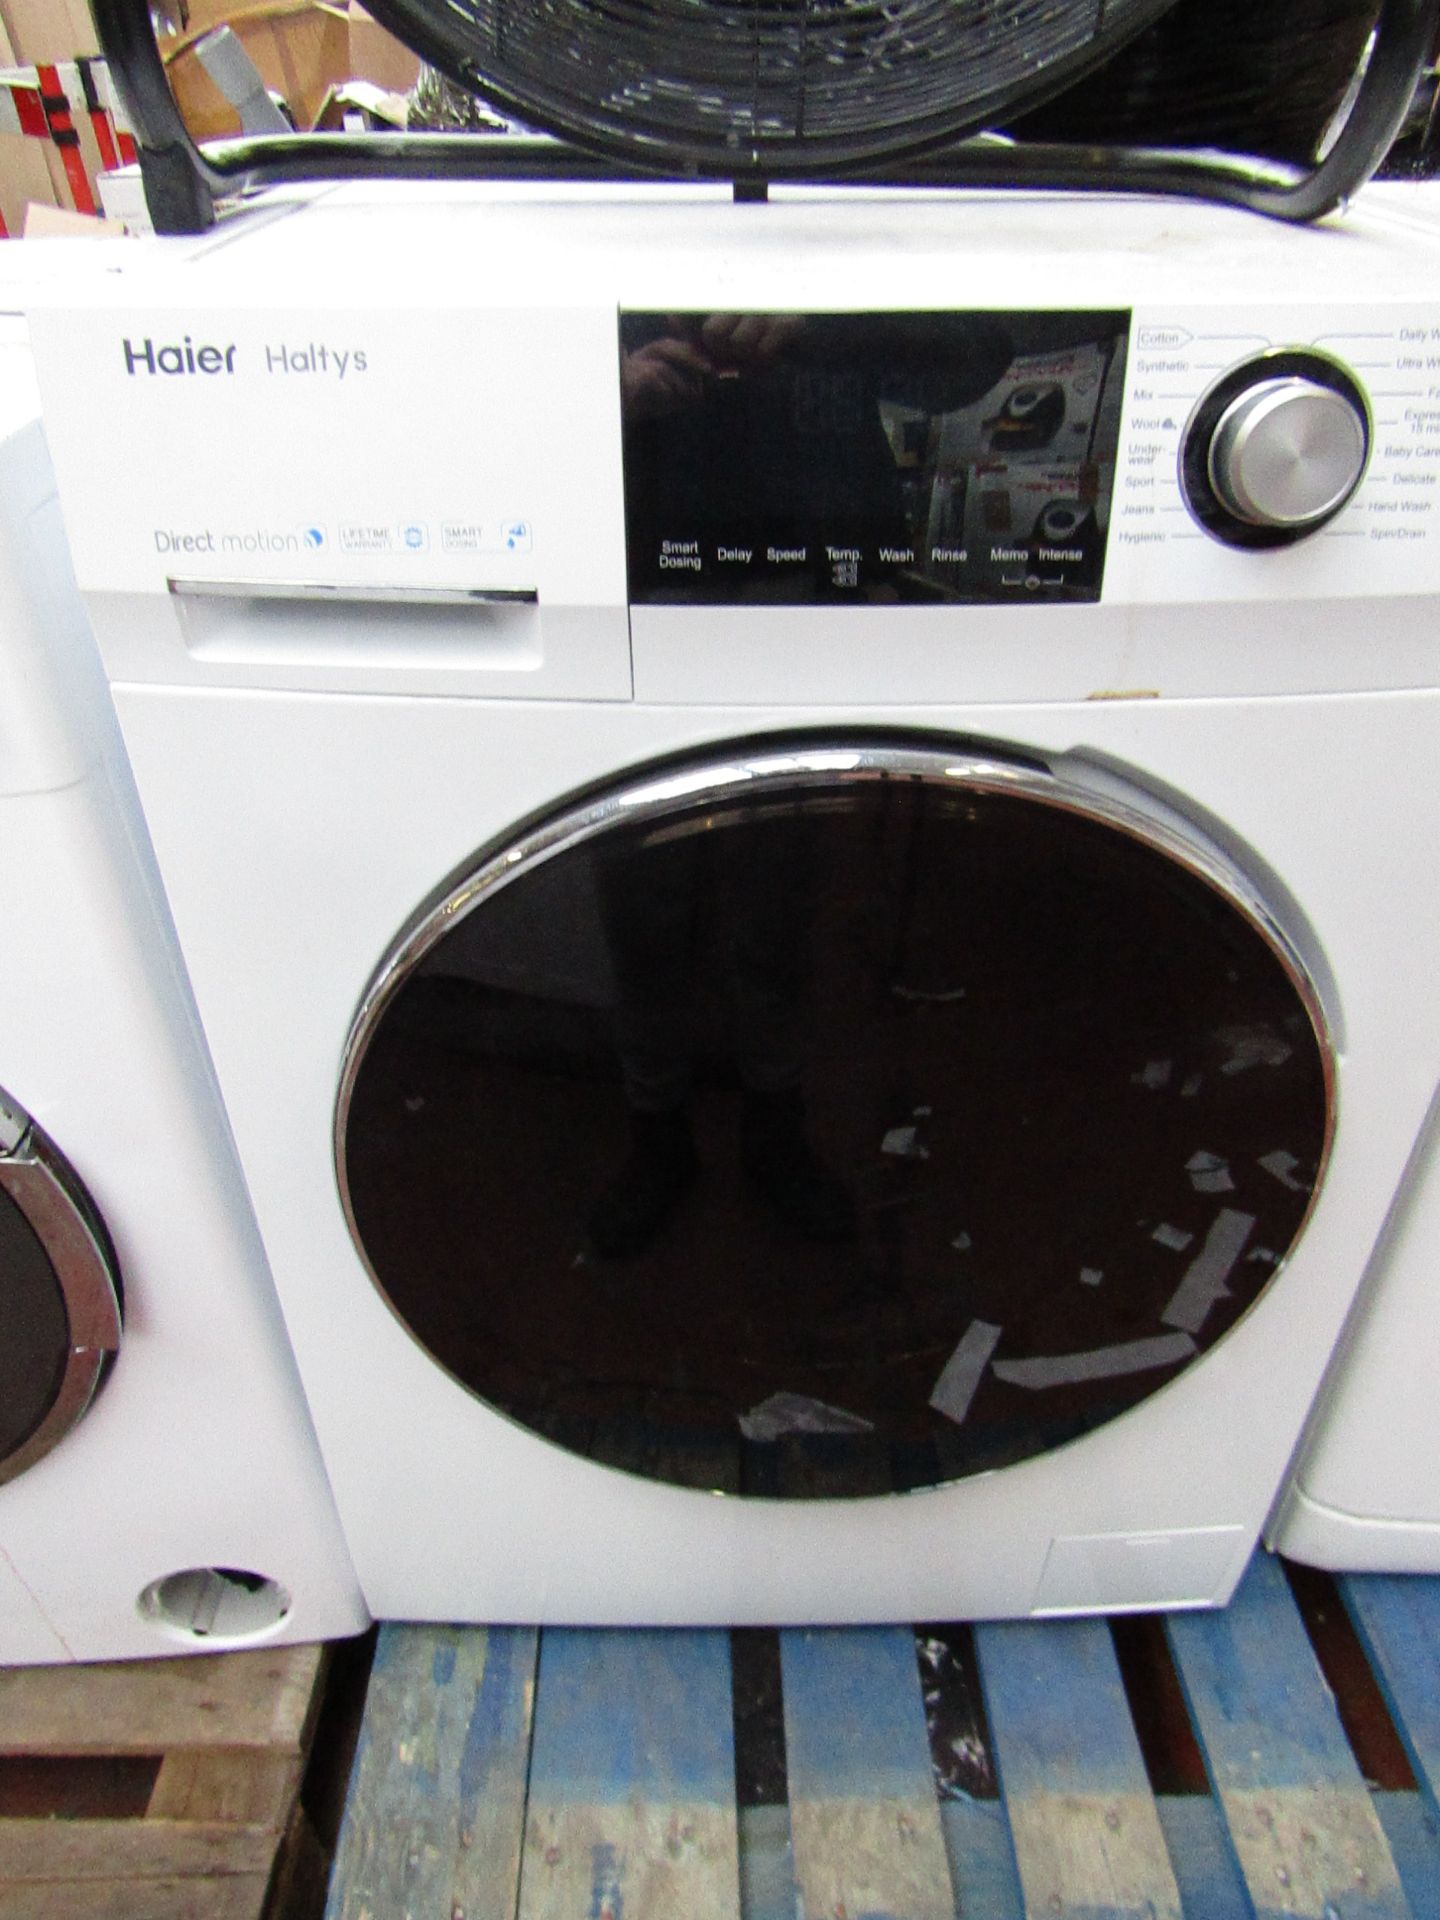 HAIER HW100-B14876 10kg 1400rpm Freestanding Washing Machine, powers on and spins. RRP Circa £470: